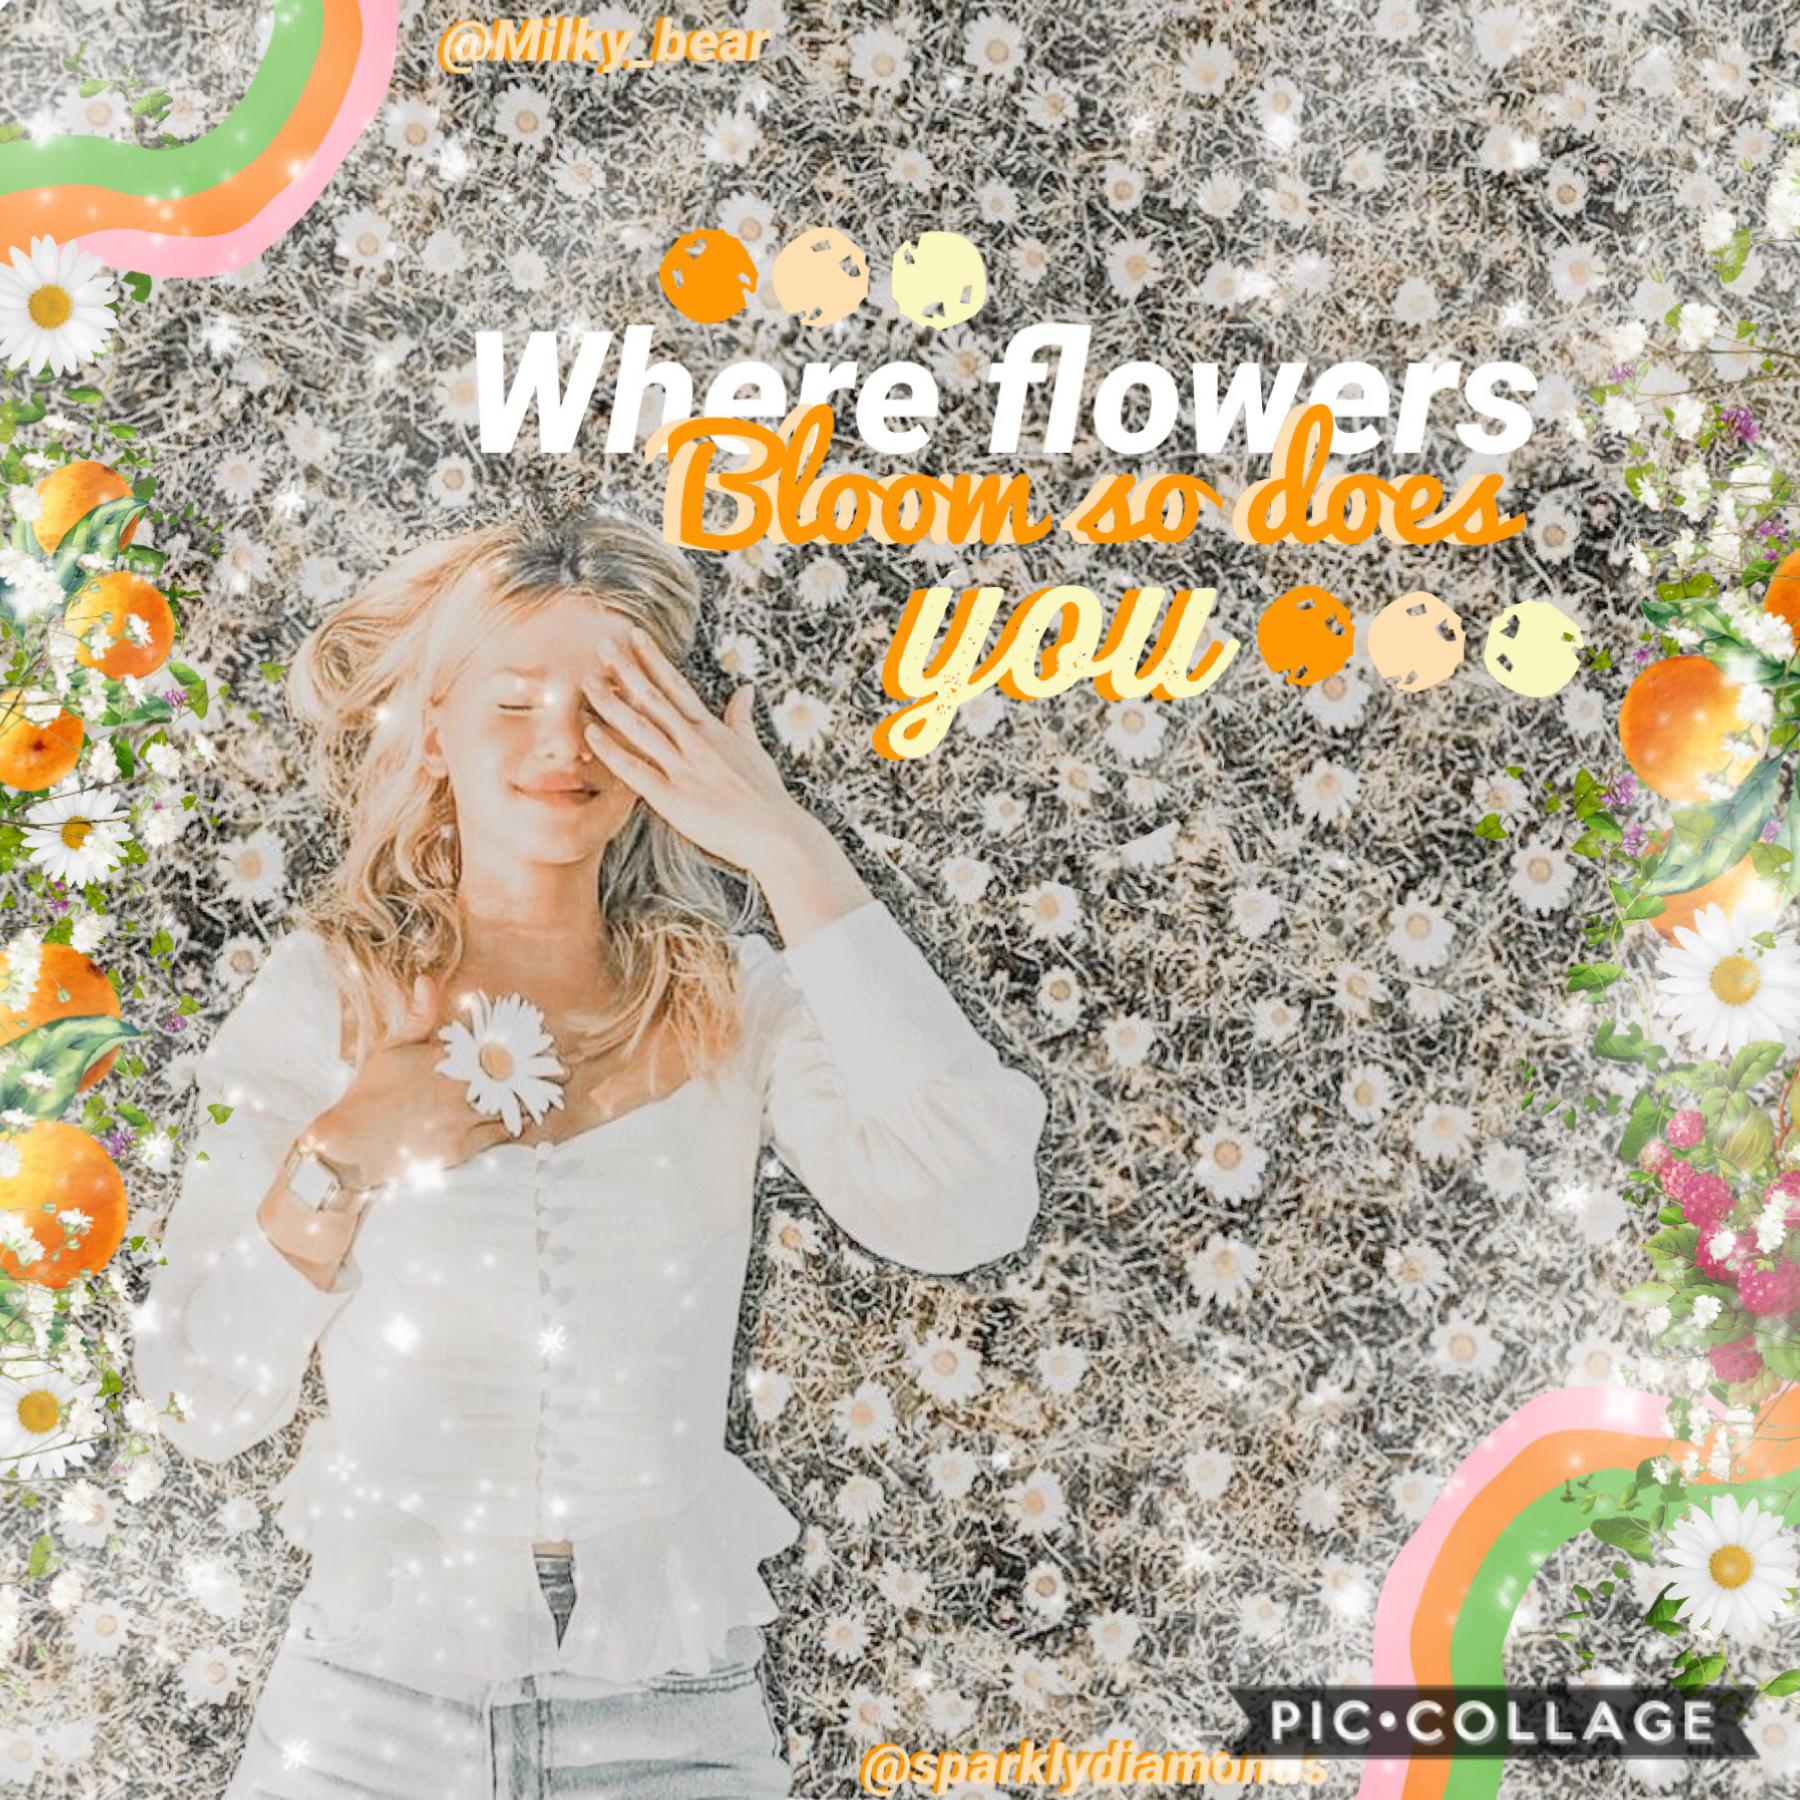 🥁COLLAB WITH 🥁
My forever bestie -sparklydiamonds- our second collab she’s so nice make sure to go follow her Also this is entered in the spring contest for the spring contest so yeah I’m excited fo spring we’ll (I’m excited for Autum cause here in Austra